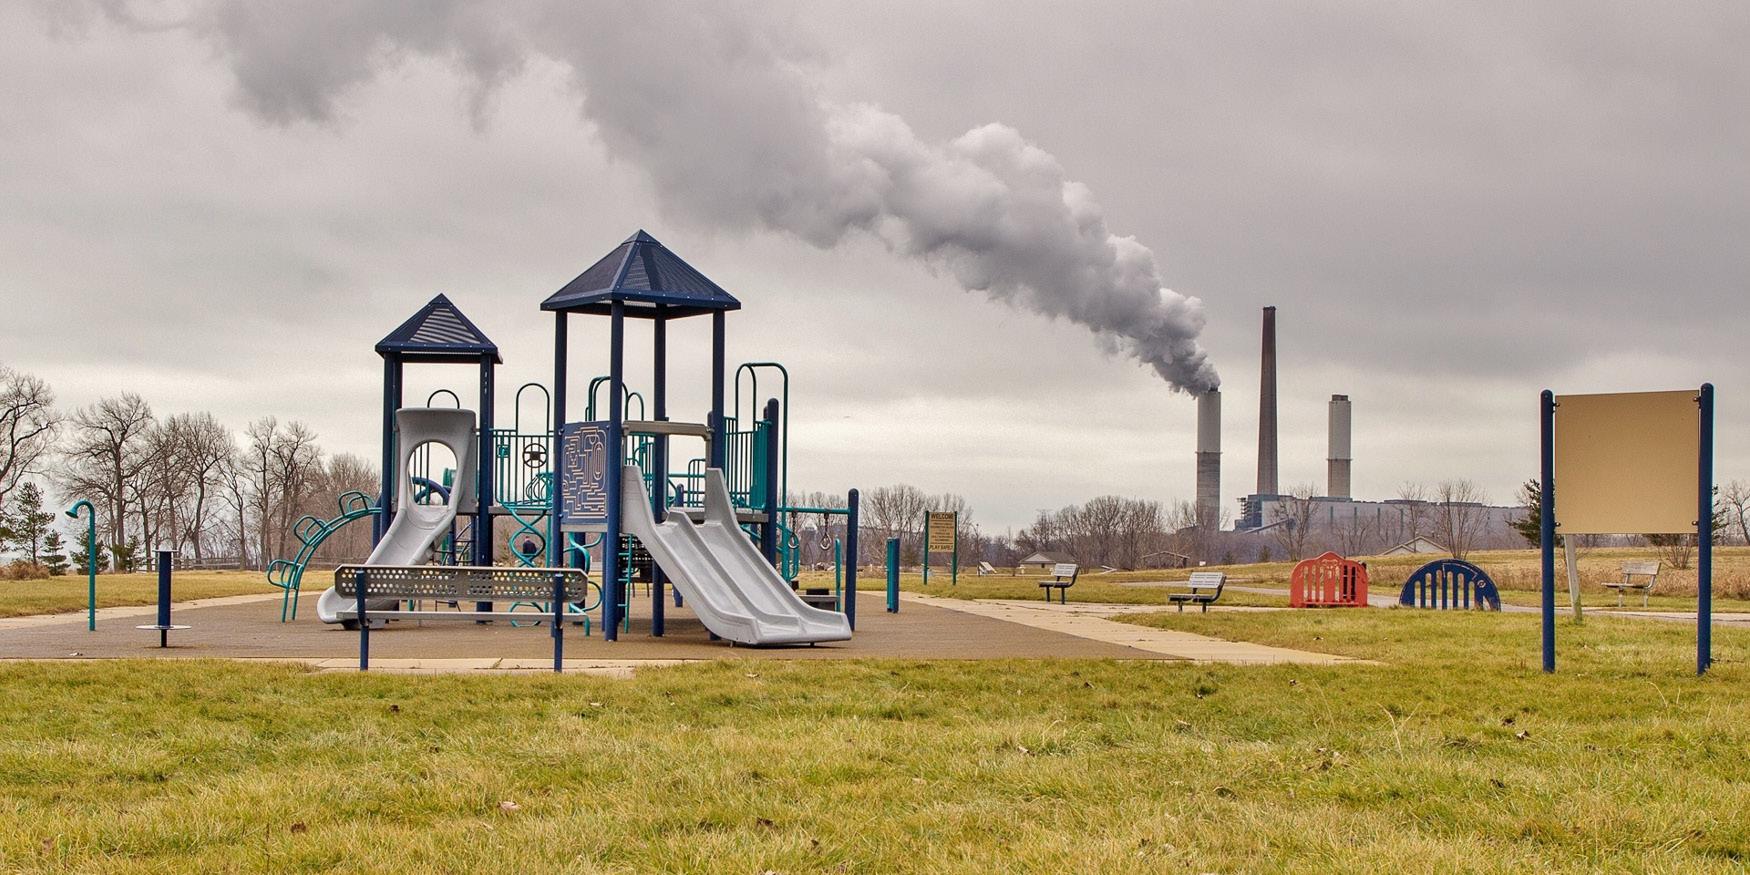 Children's playground with a smokestack billowing smoke in the background.